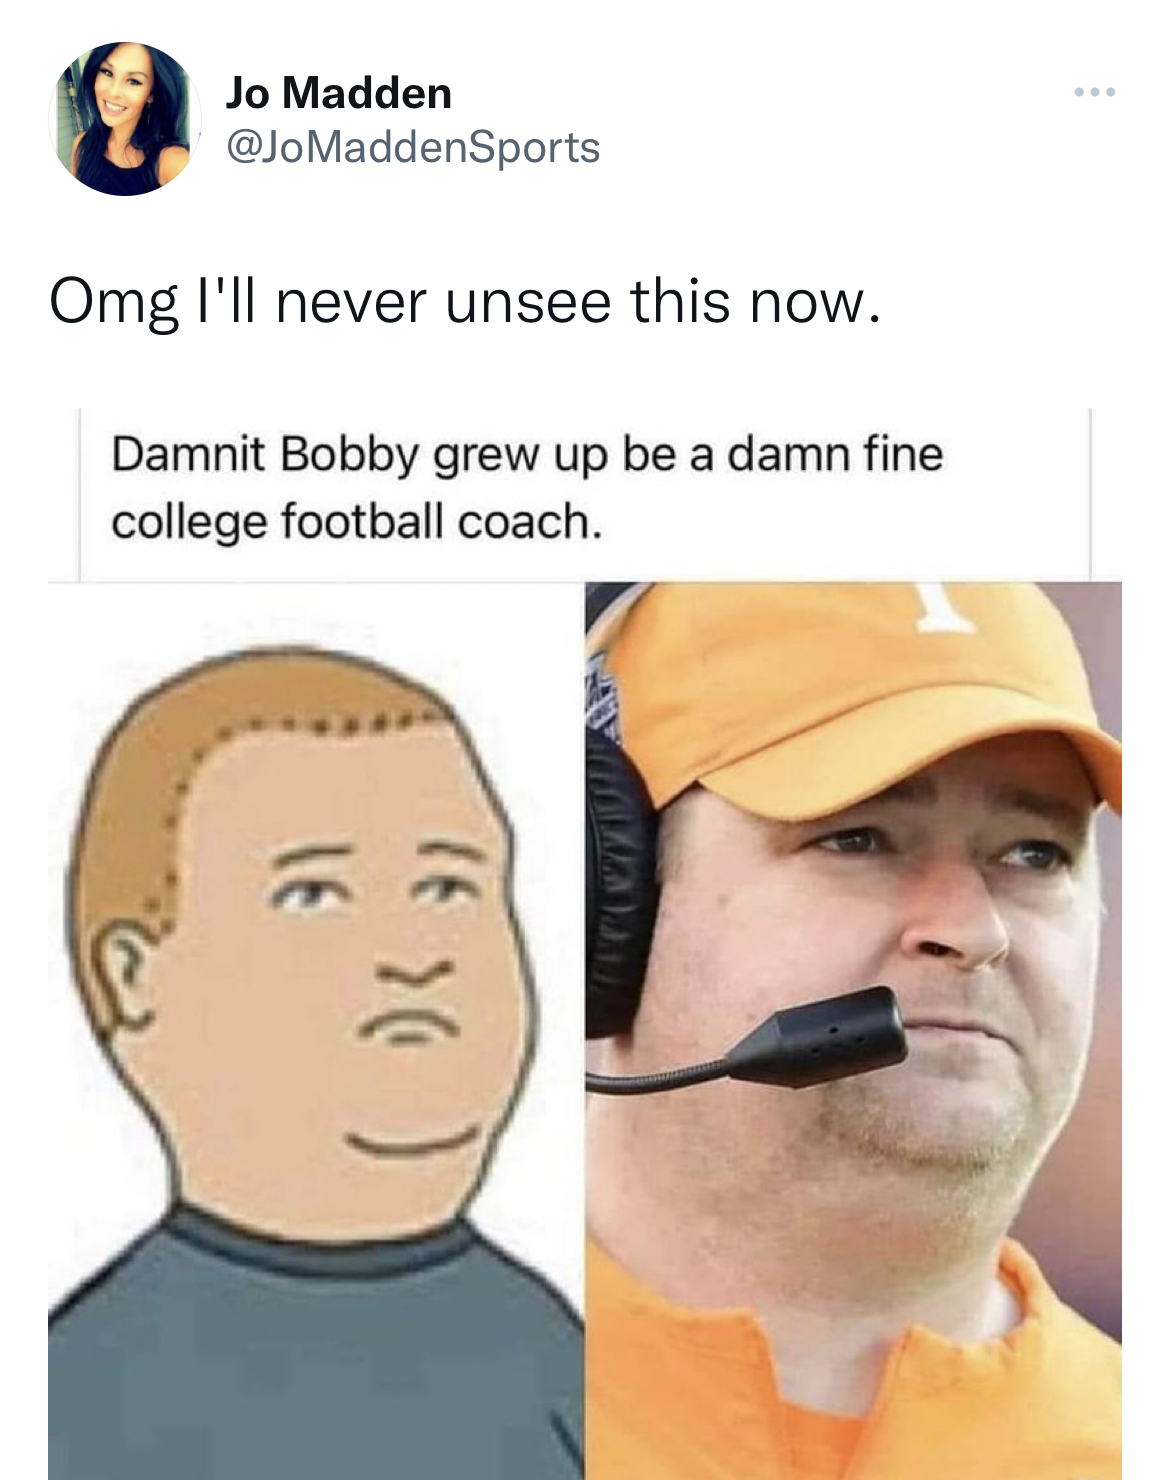 Celeb roasts of the week - head - Jo Madden Omg I'll never unsee this now. Damnit Bobby grew up be a damn fine college football coach. 31 Te S www